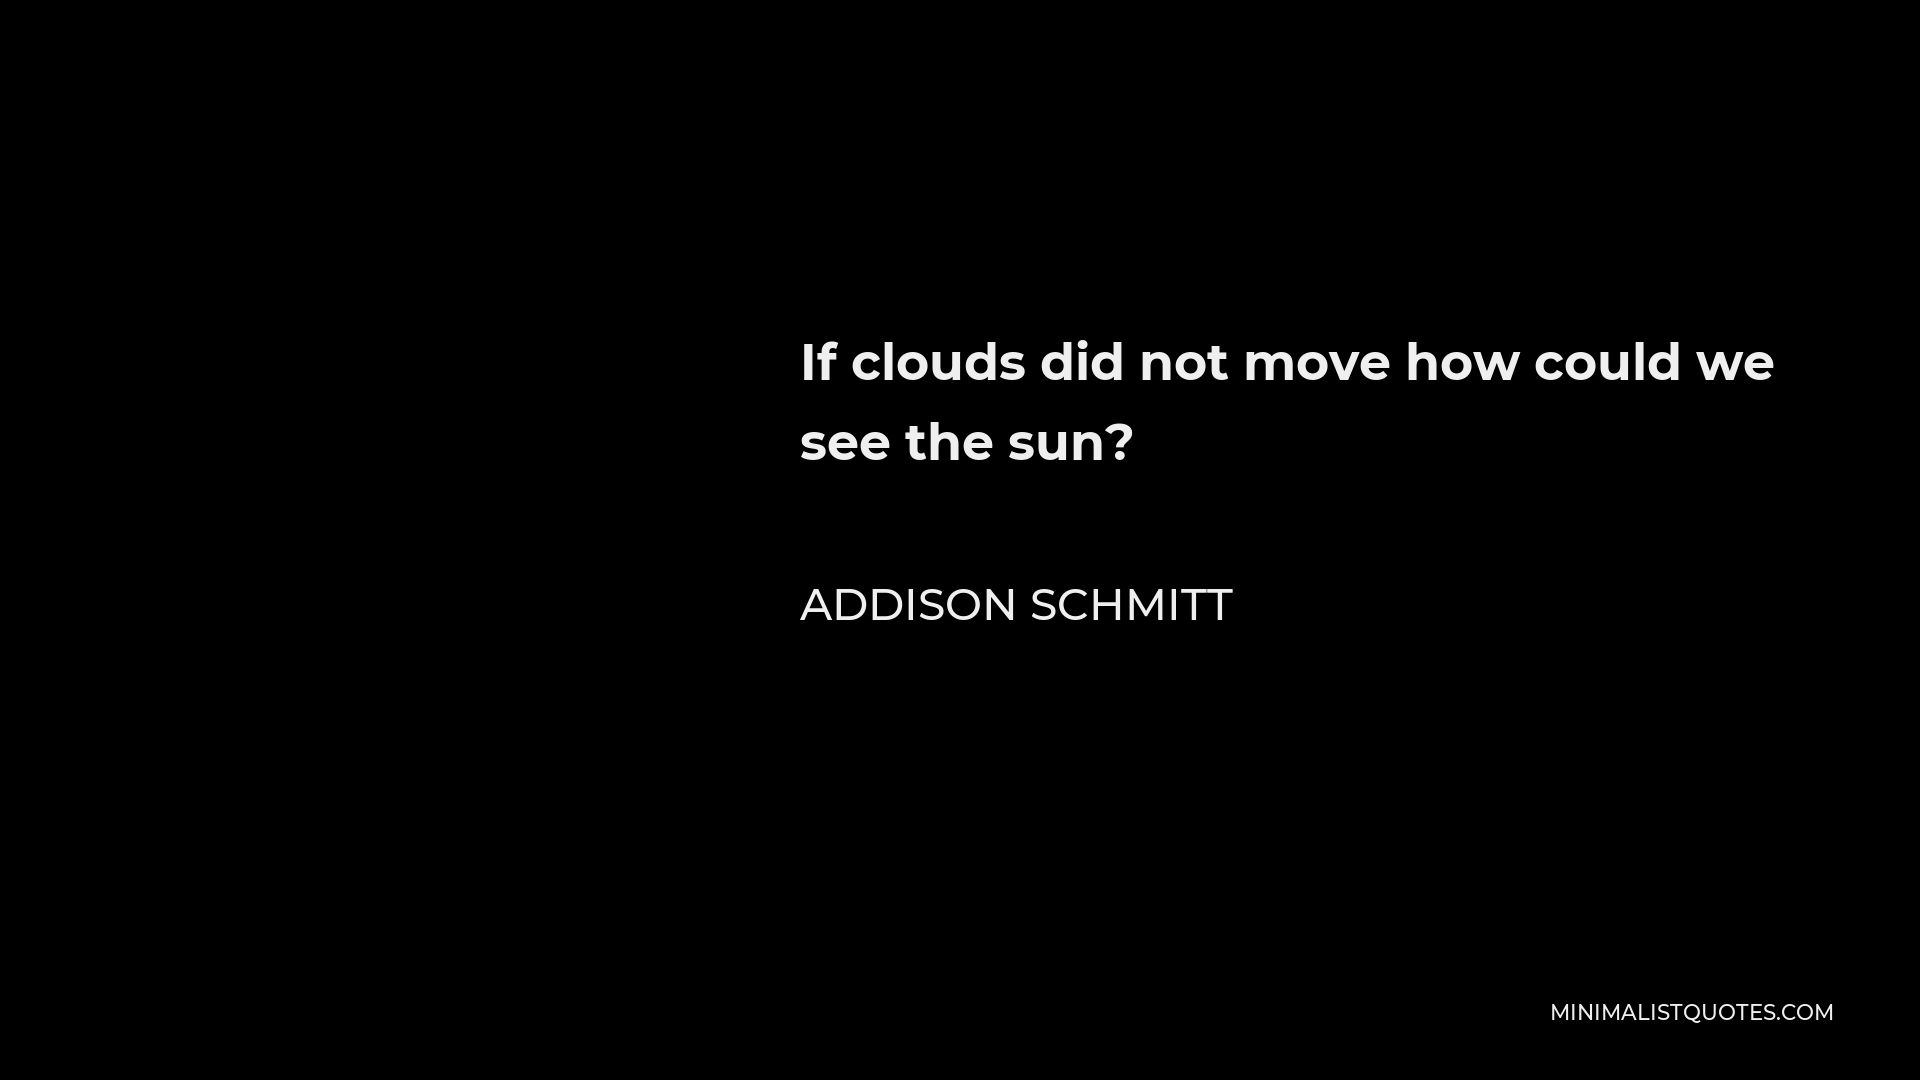 Addison Schmitt Quote - If clouds did not move how could we see the sun?